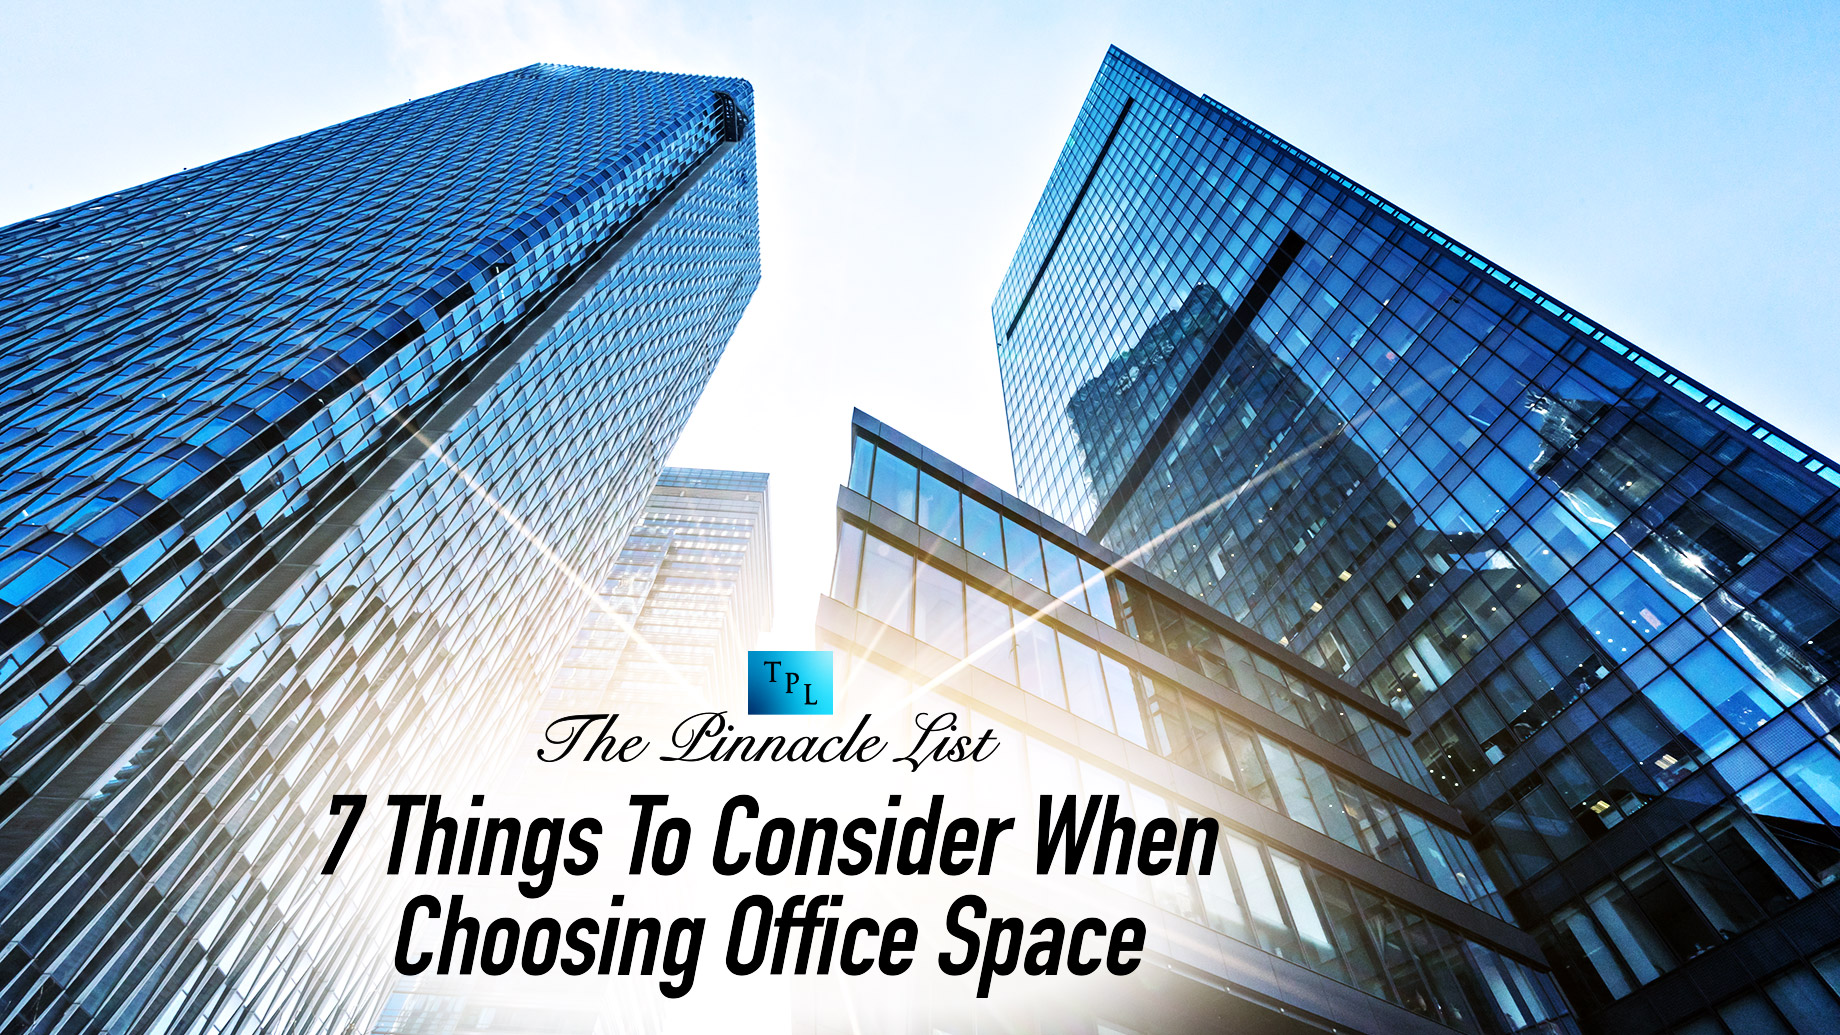 7 Things To Consider When Choosing Office Space